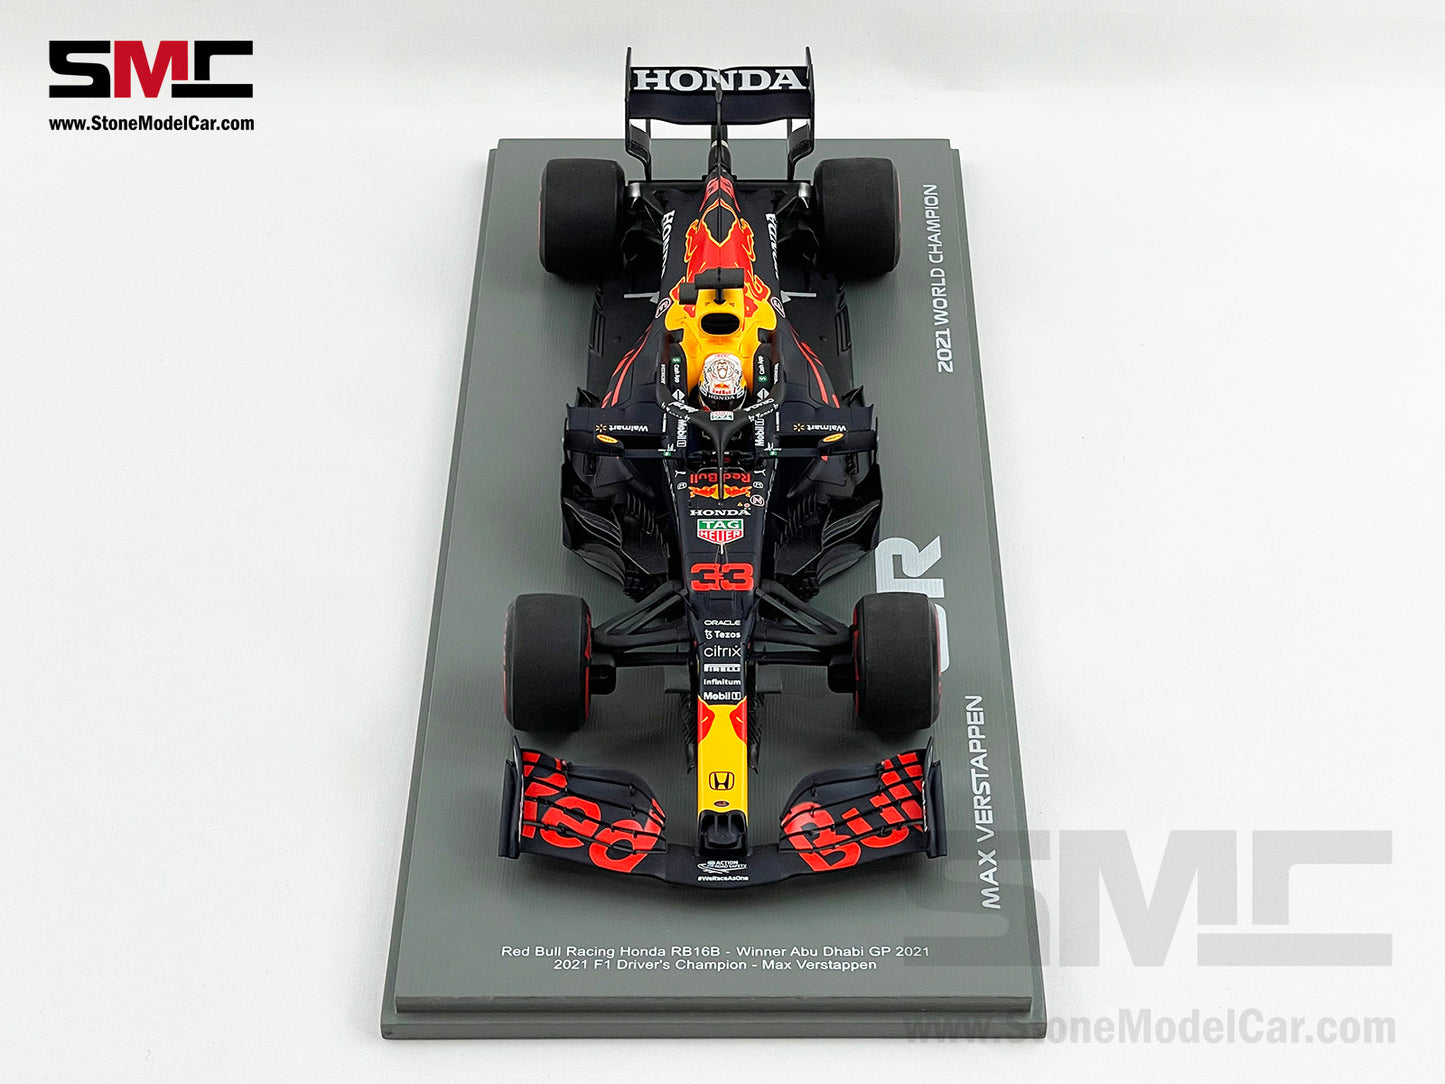 2021 F1 World Champion #33 Max Verstappen Red Bull RB16B Abu Dhabi GP 1:18 Spark with Trophies